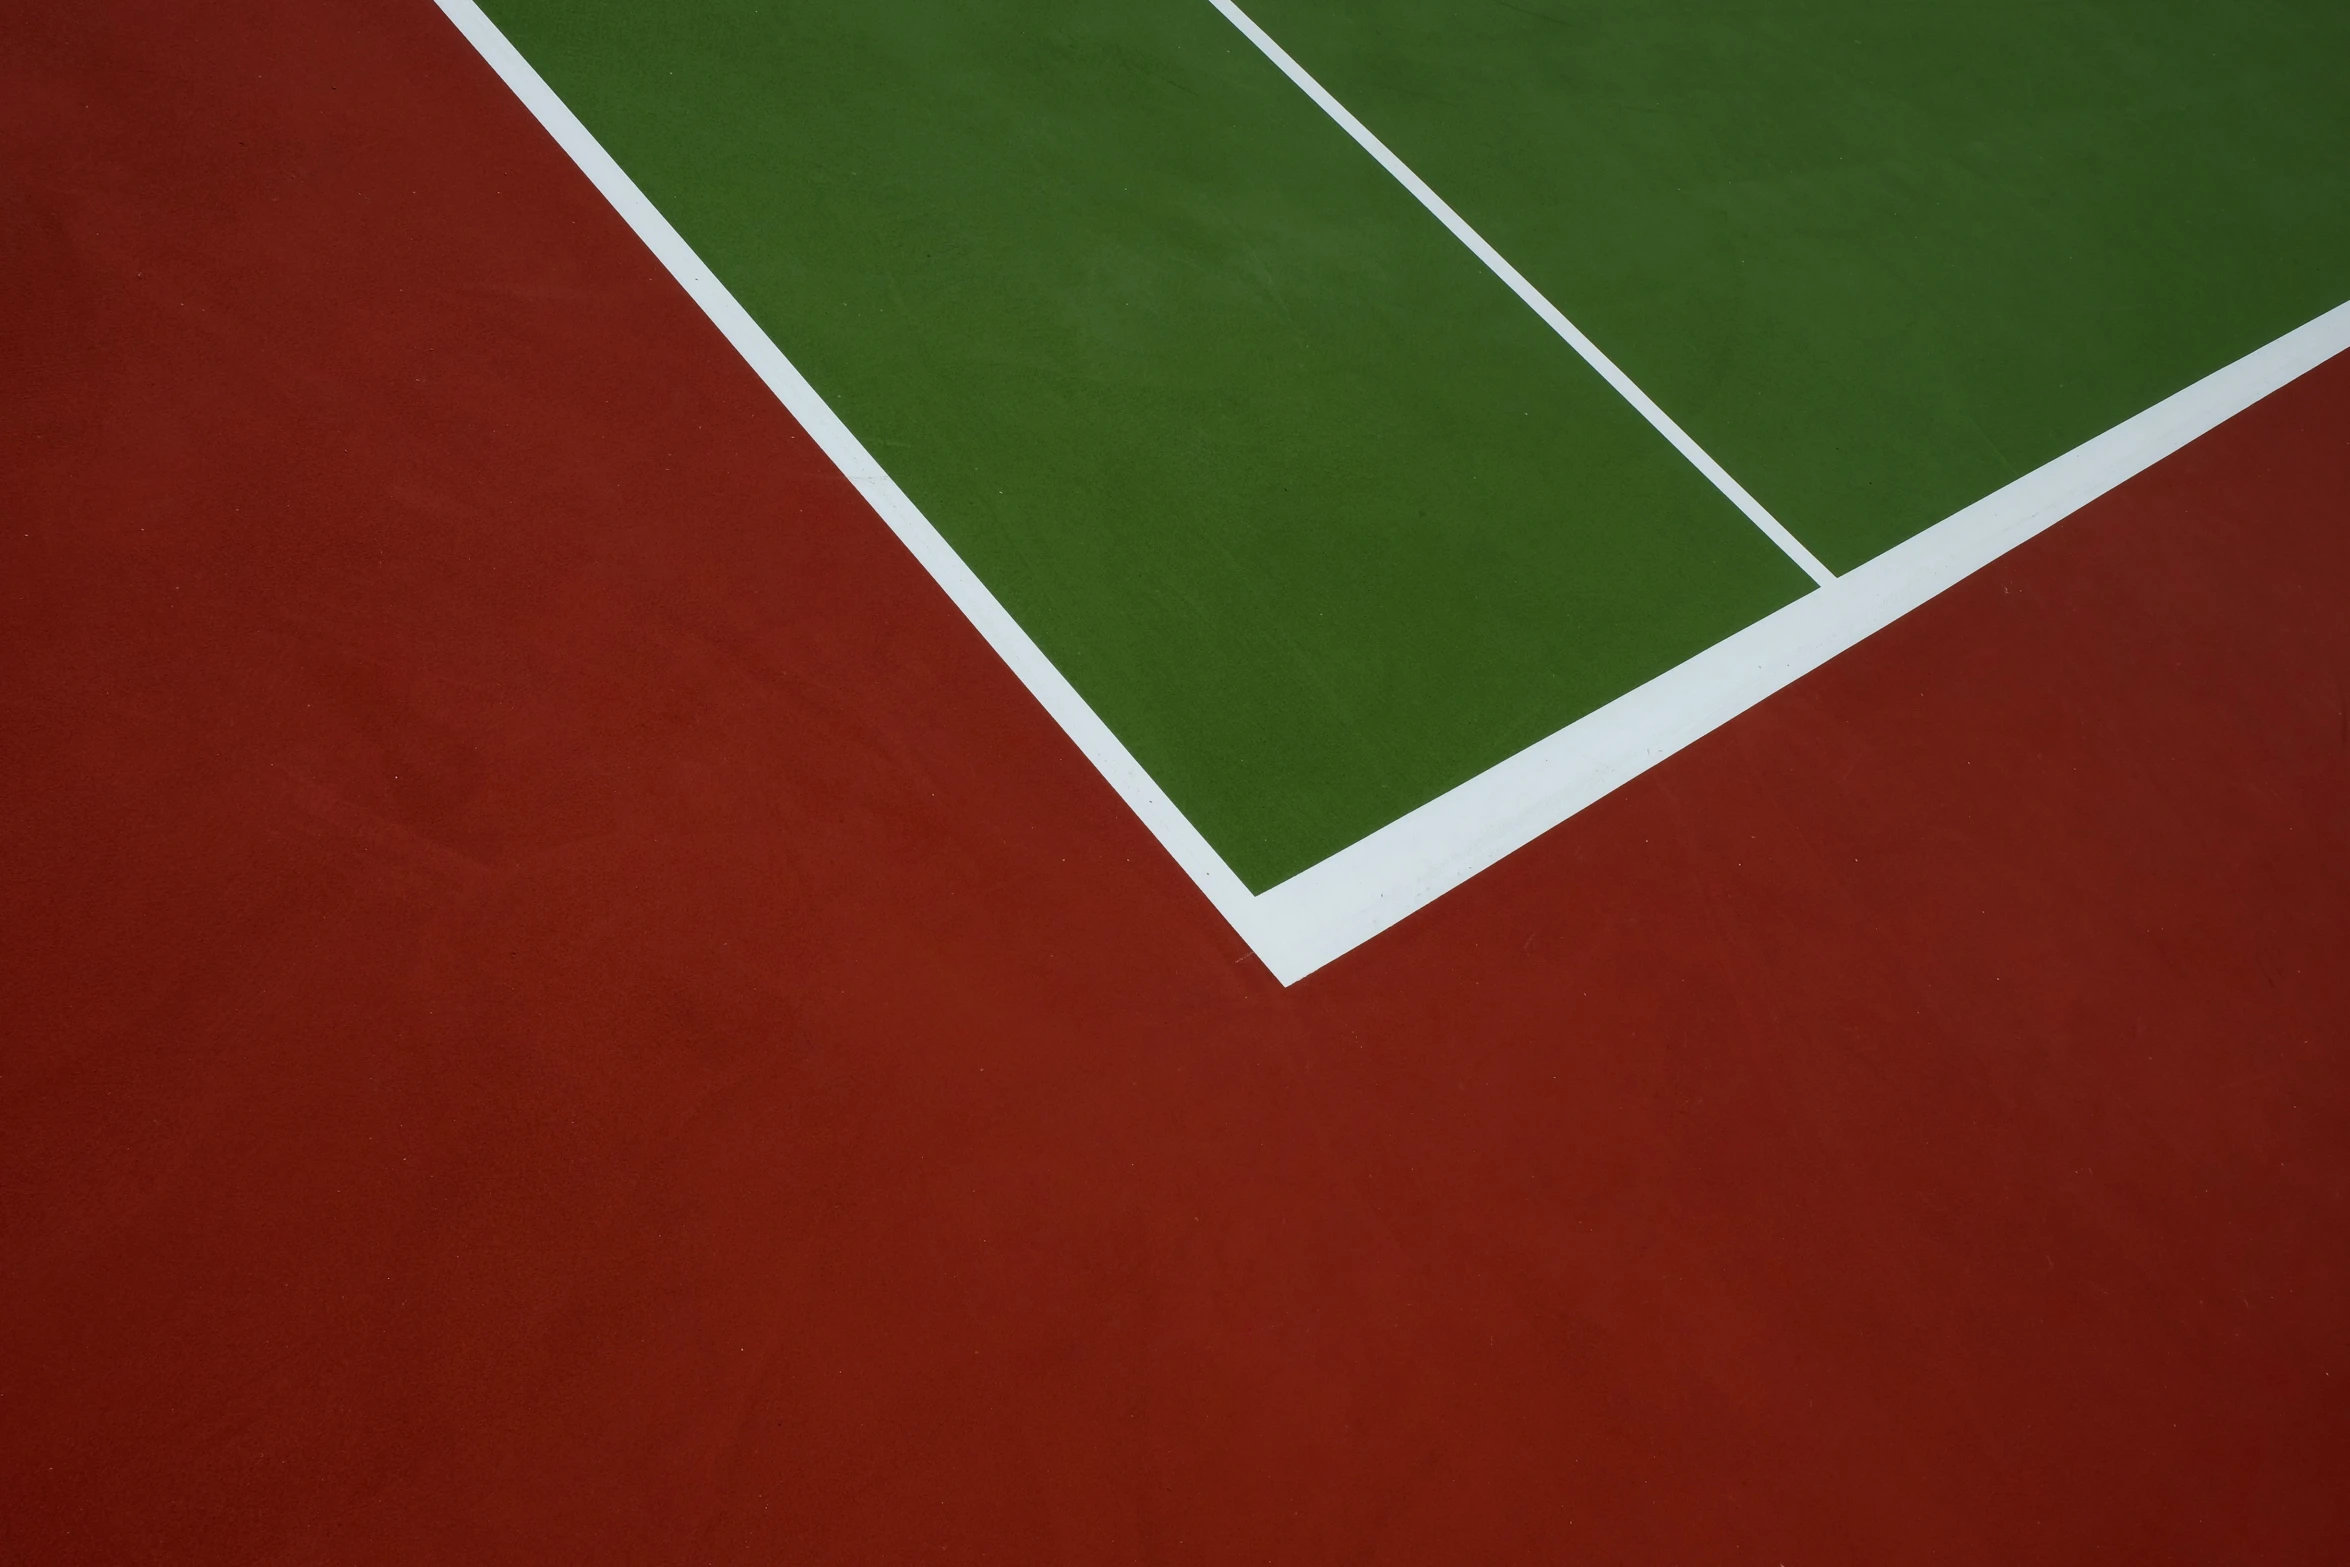 a tennis court with green and red floor